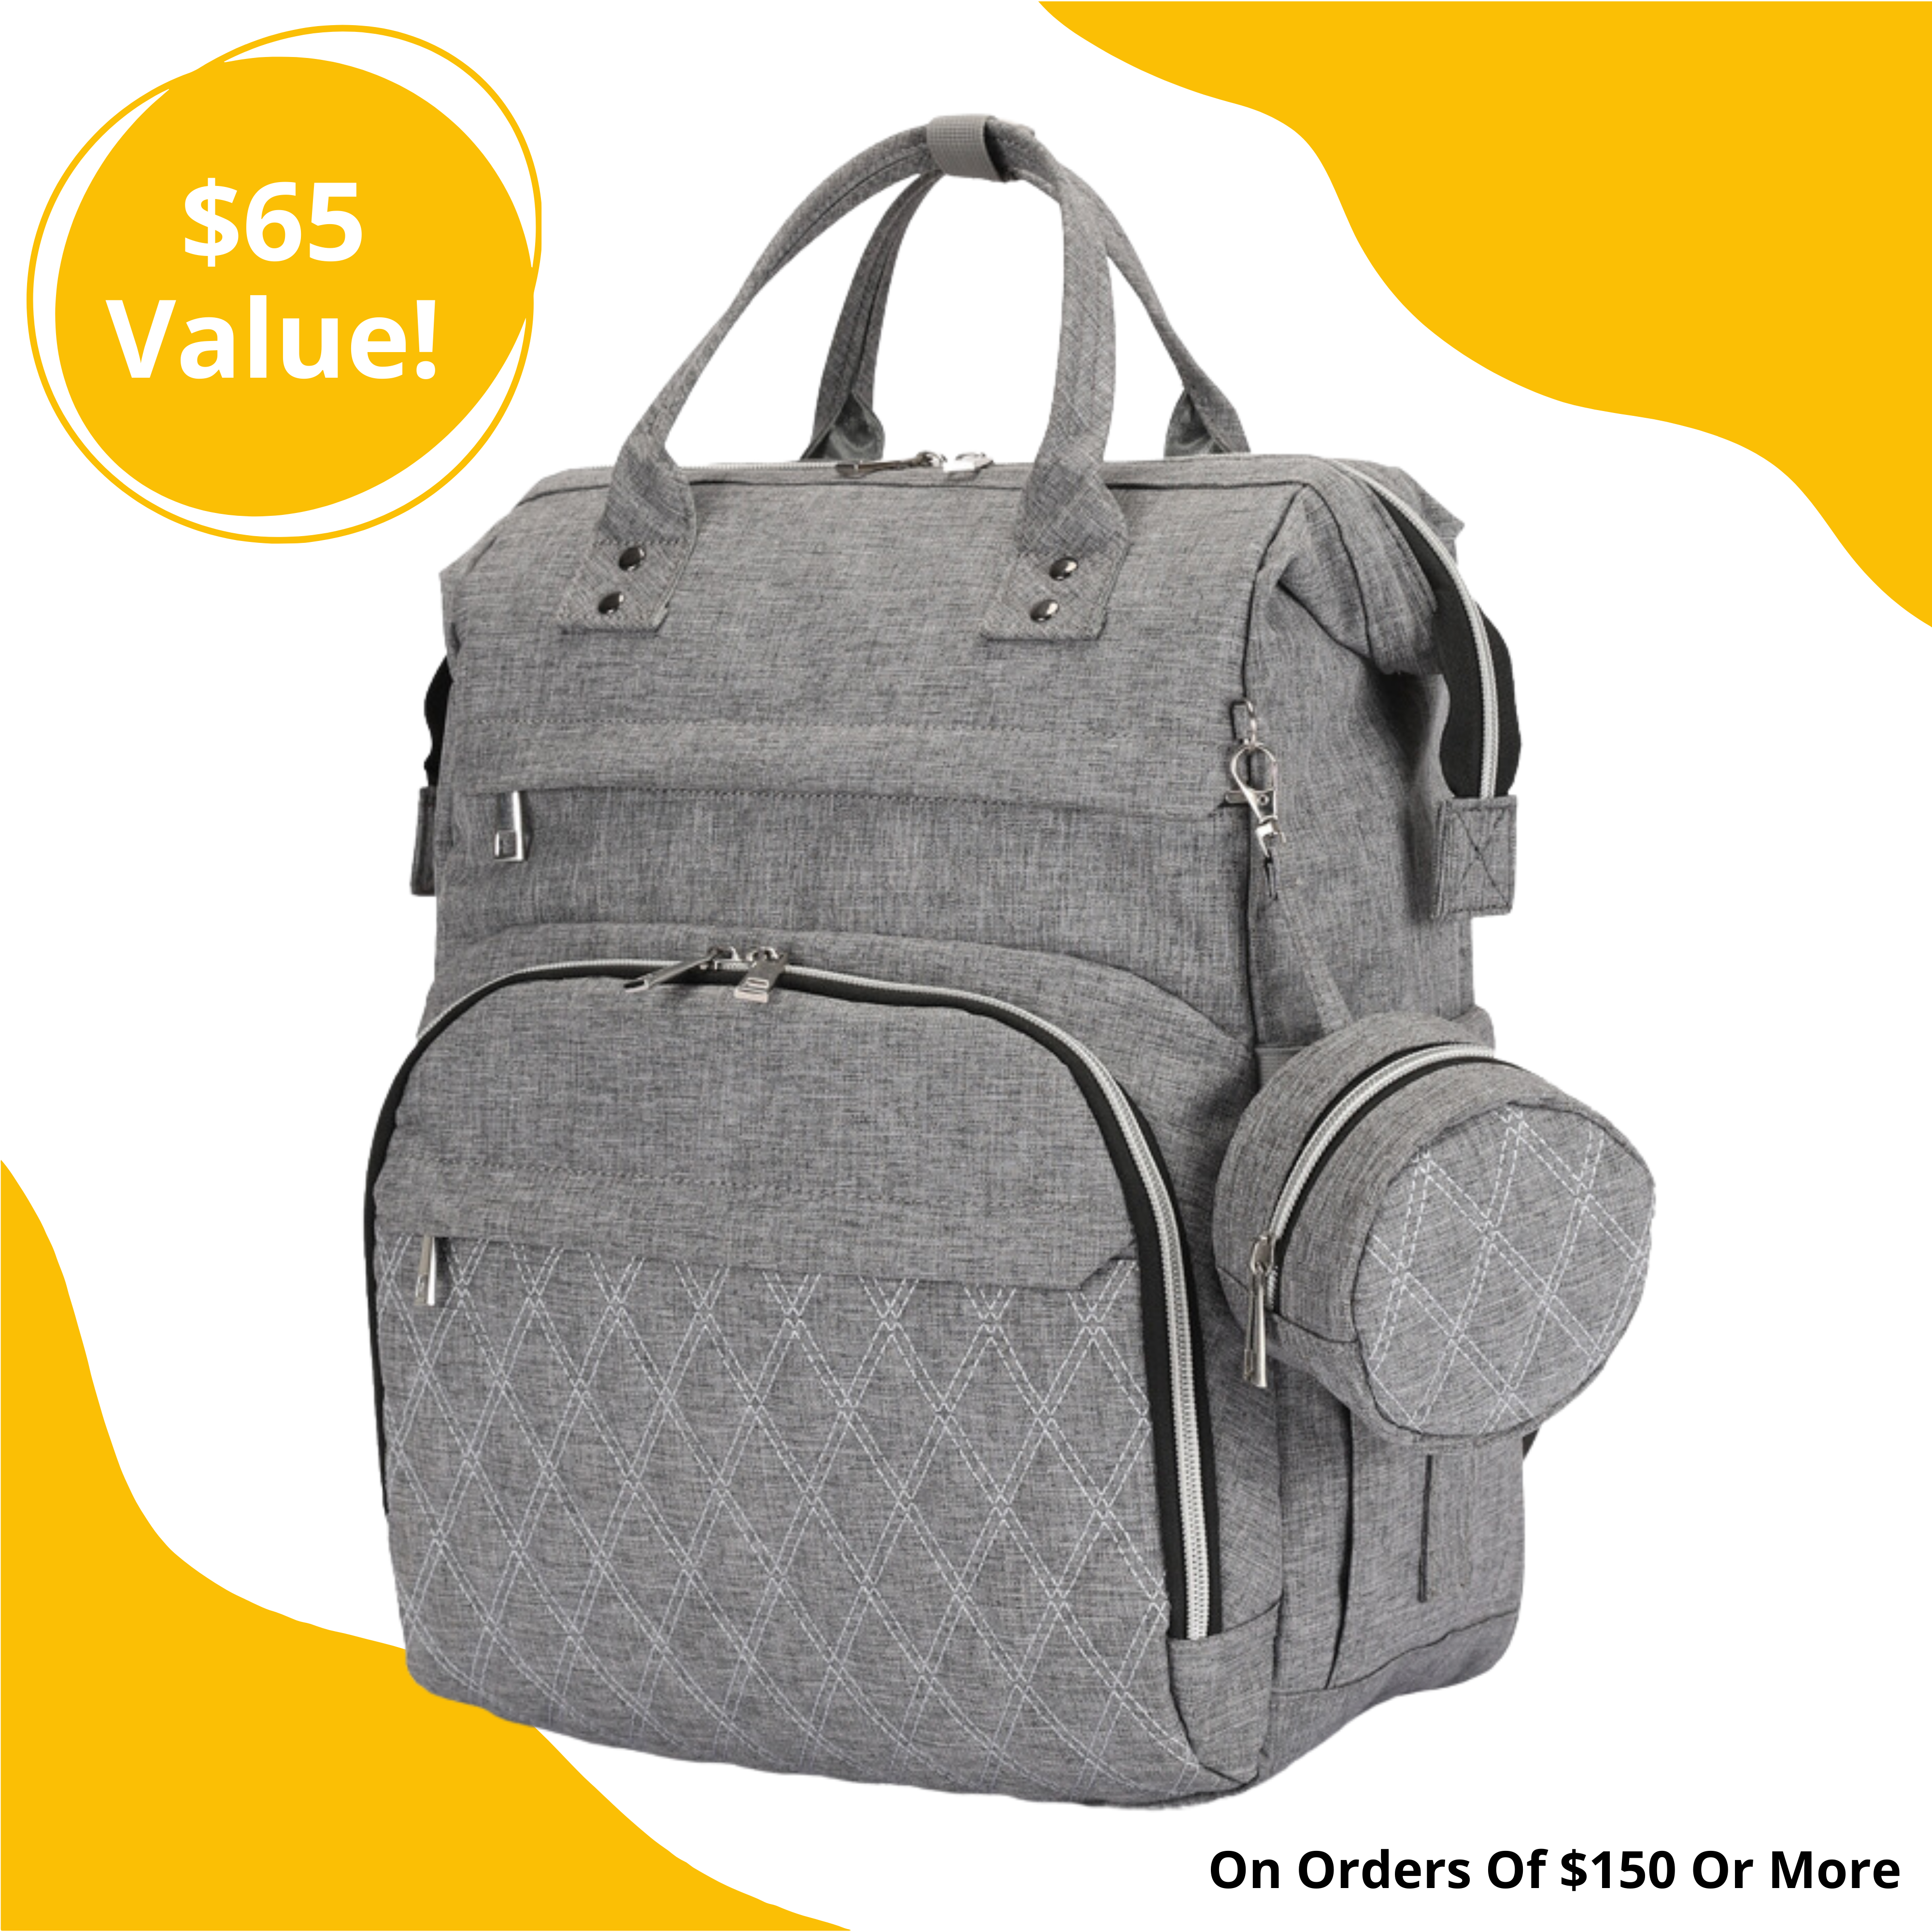 Diaper Backpack Gift With Purchase!